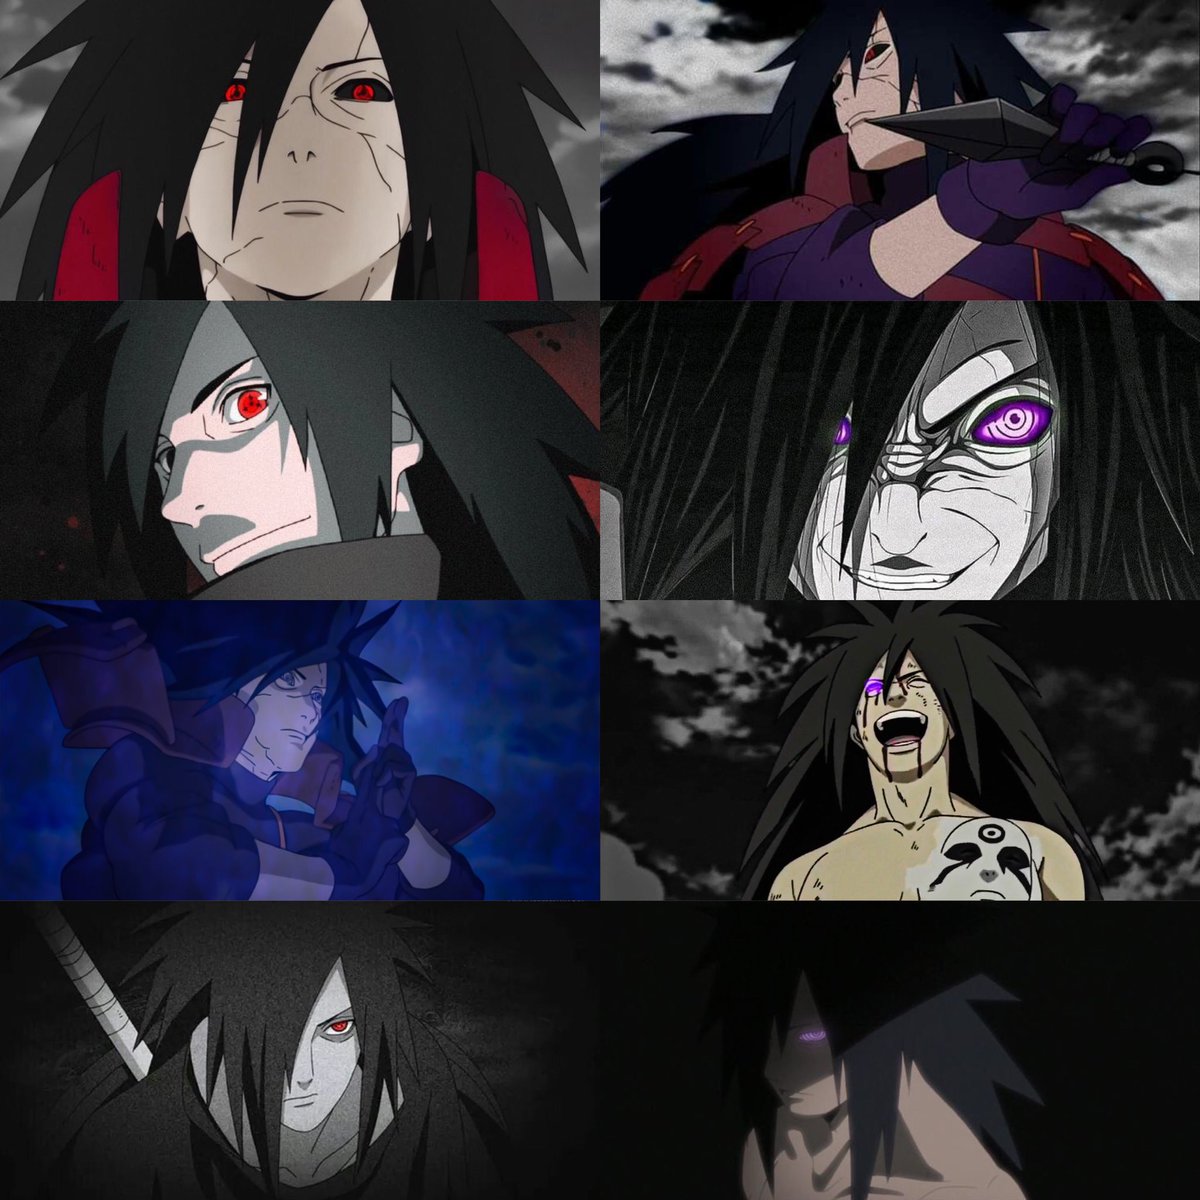 Happy birthday to the ghost of the Uchihas & one of the best antagonists in Anime, Madara Uchiha!